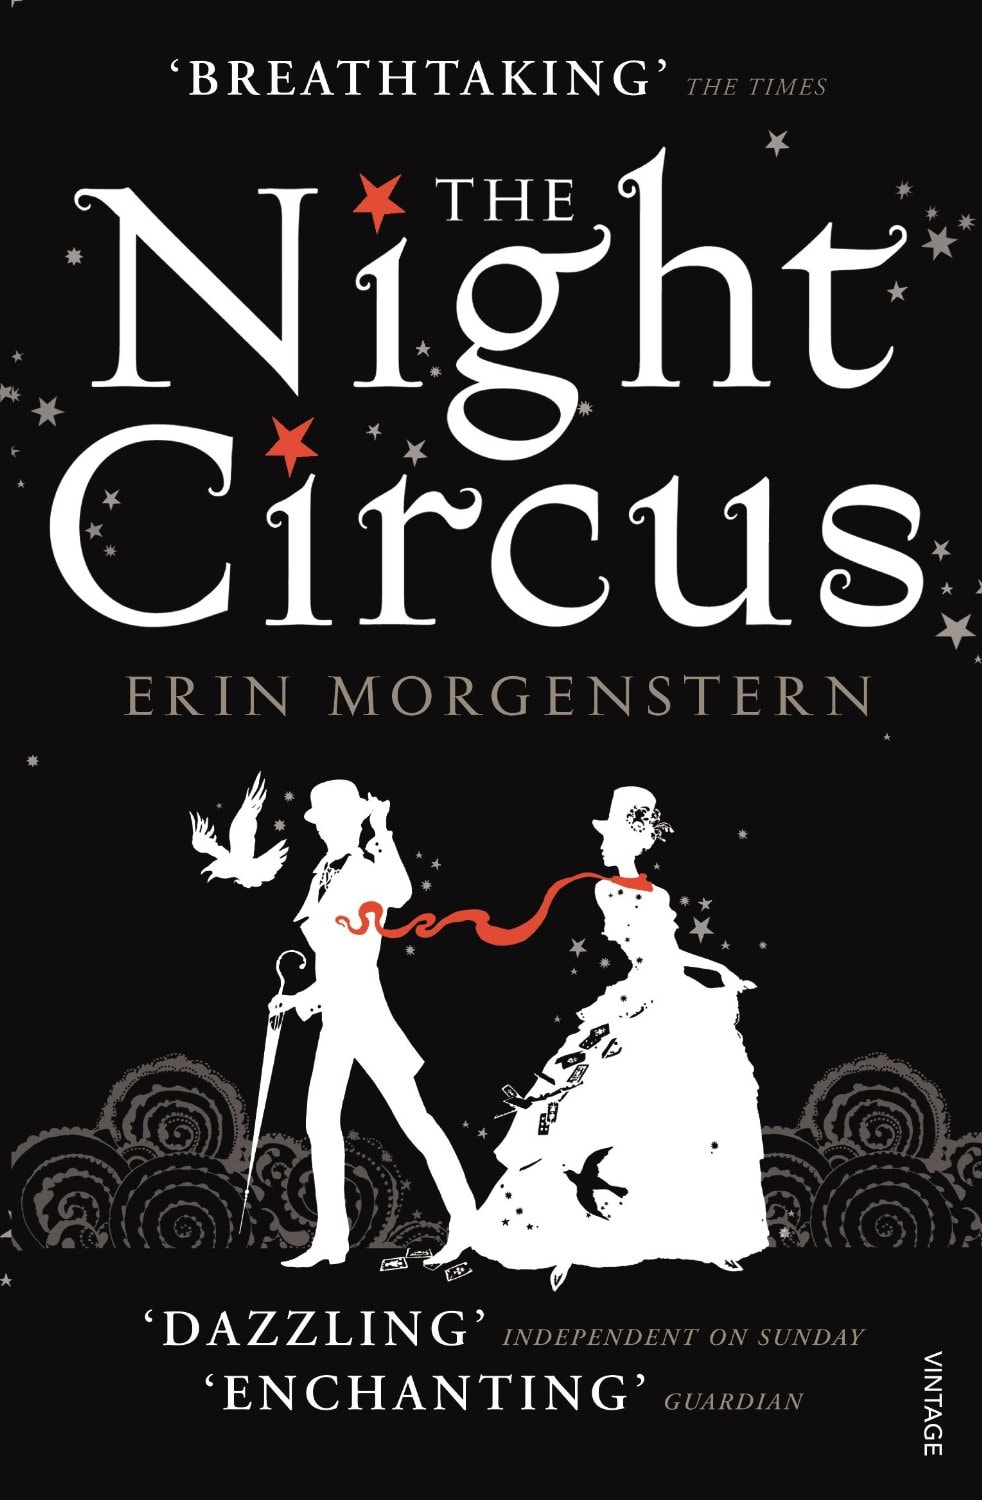 The Night Circus by Erin Morgenstern book cover